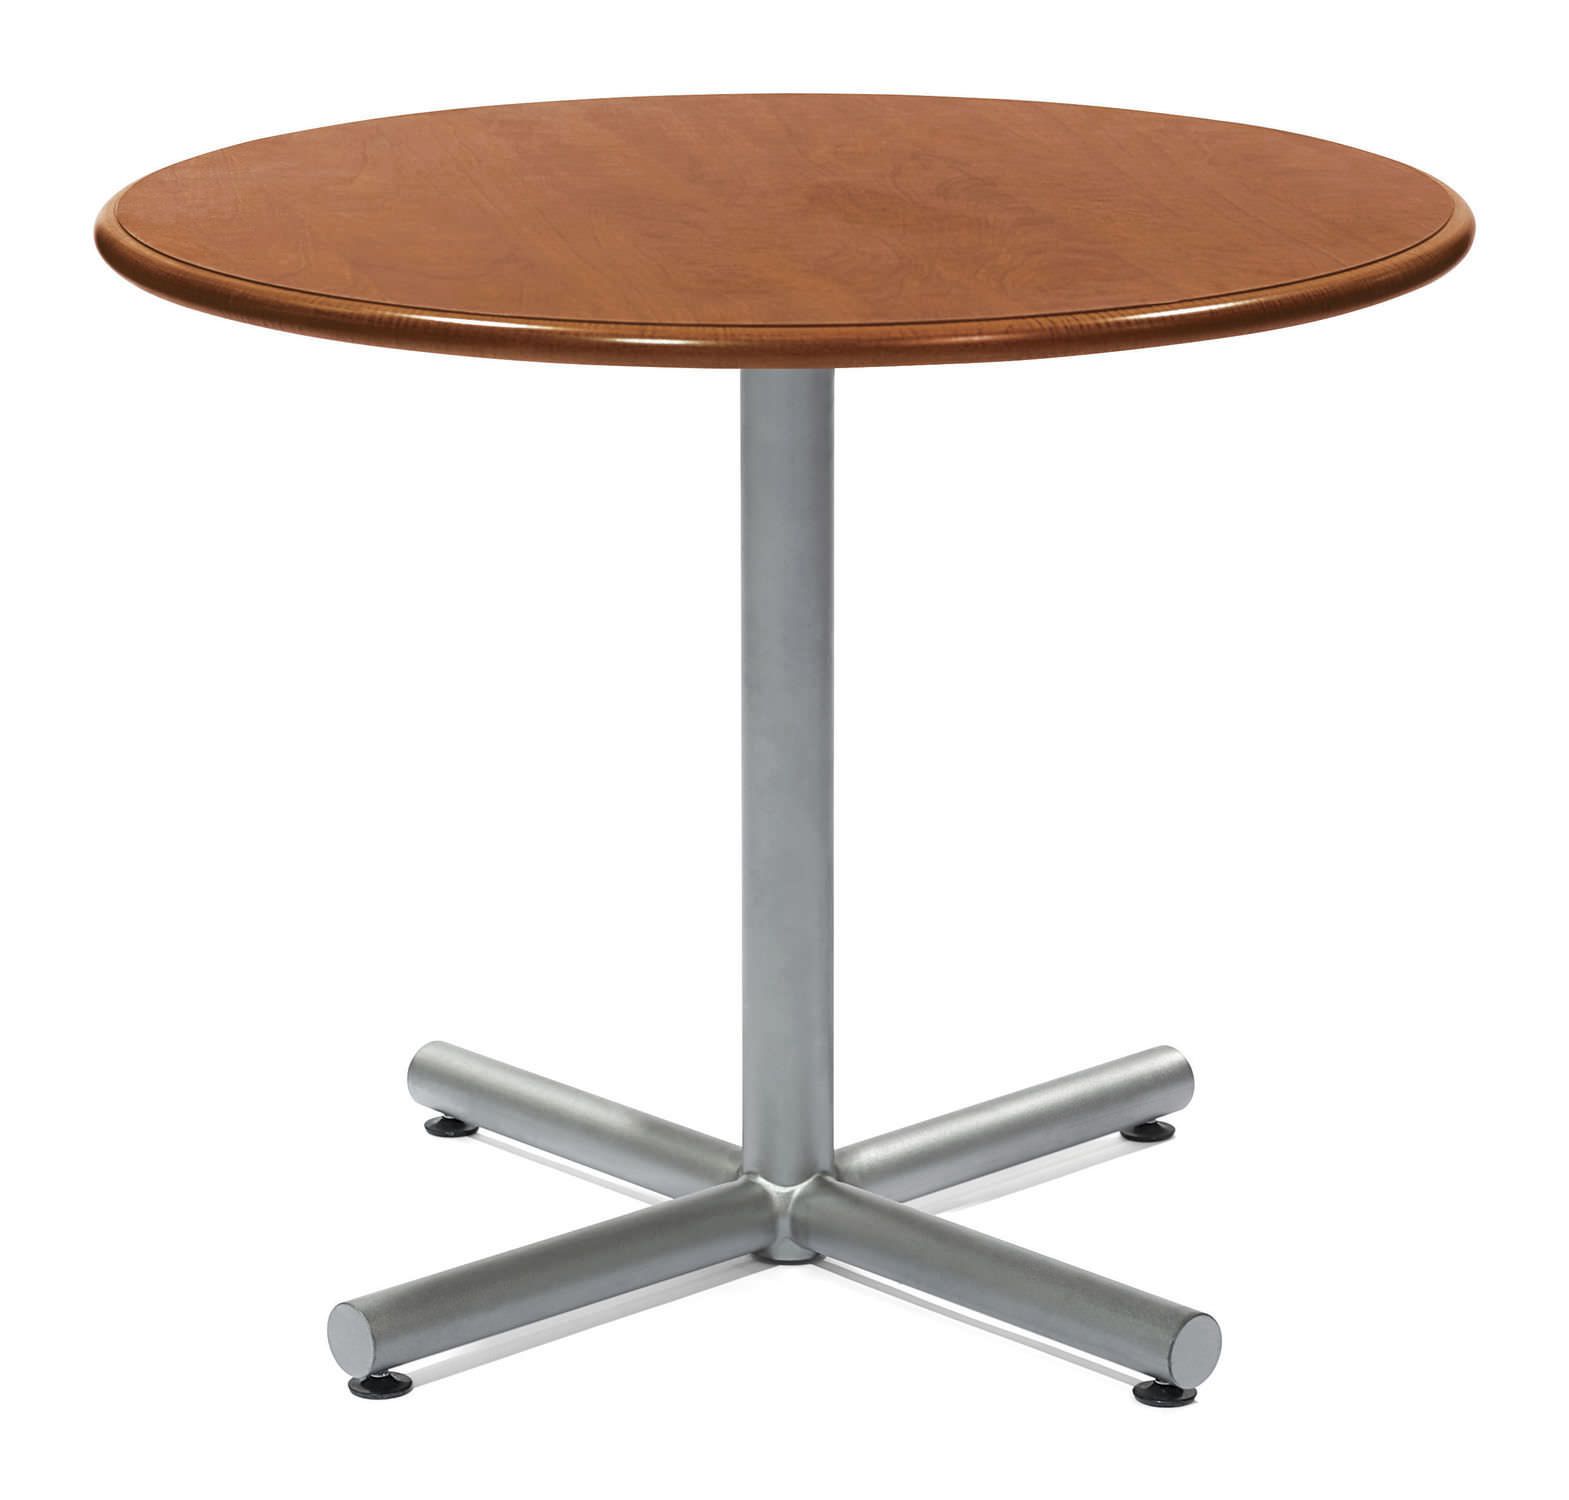 Dining table / round Stance Healthcare